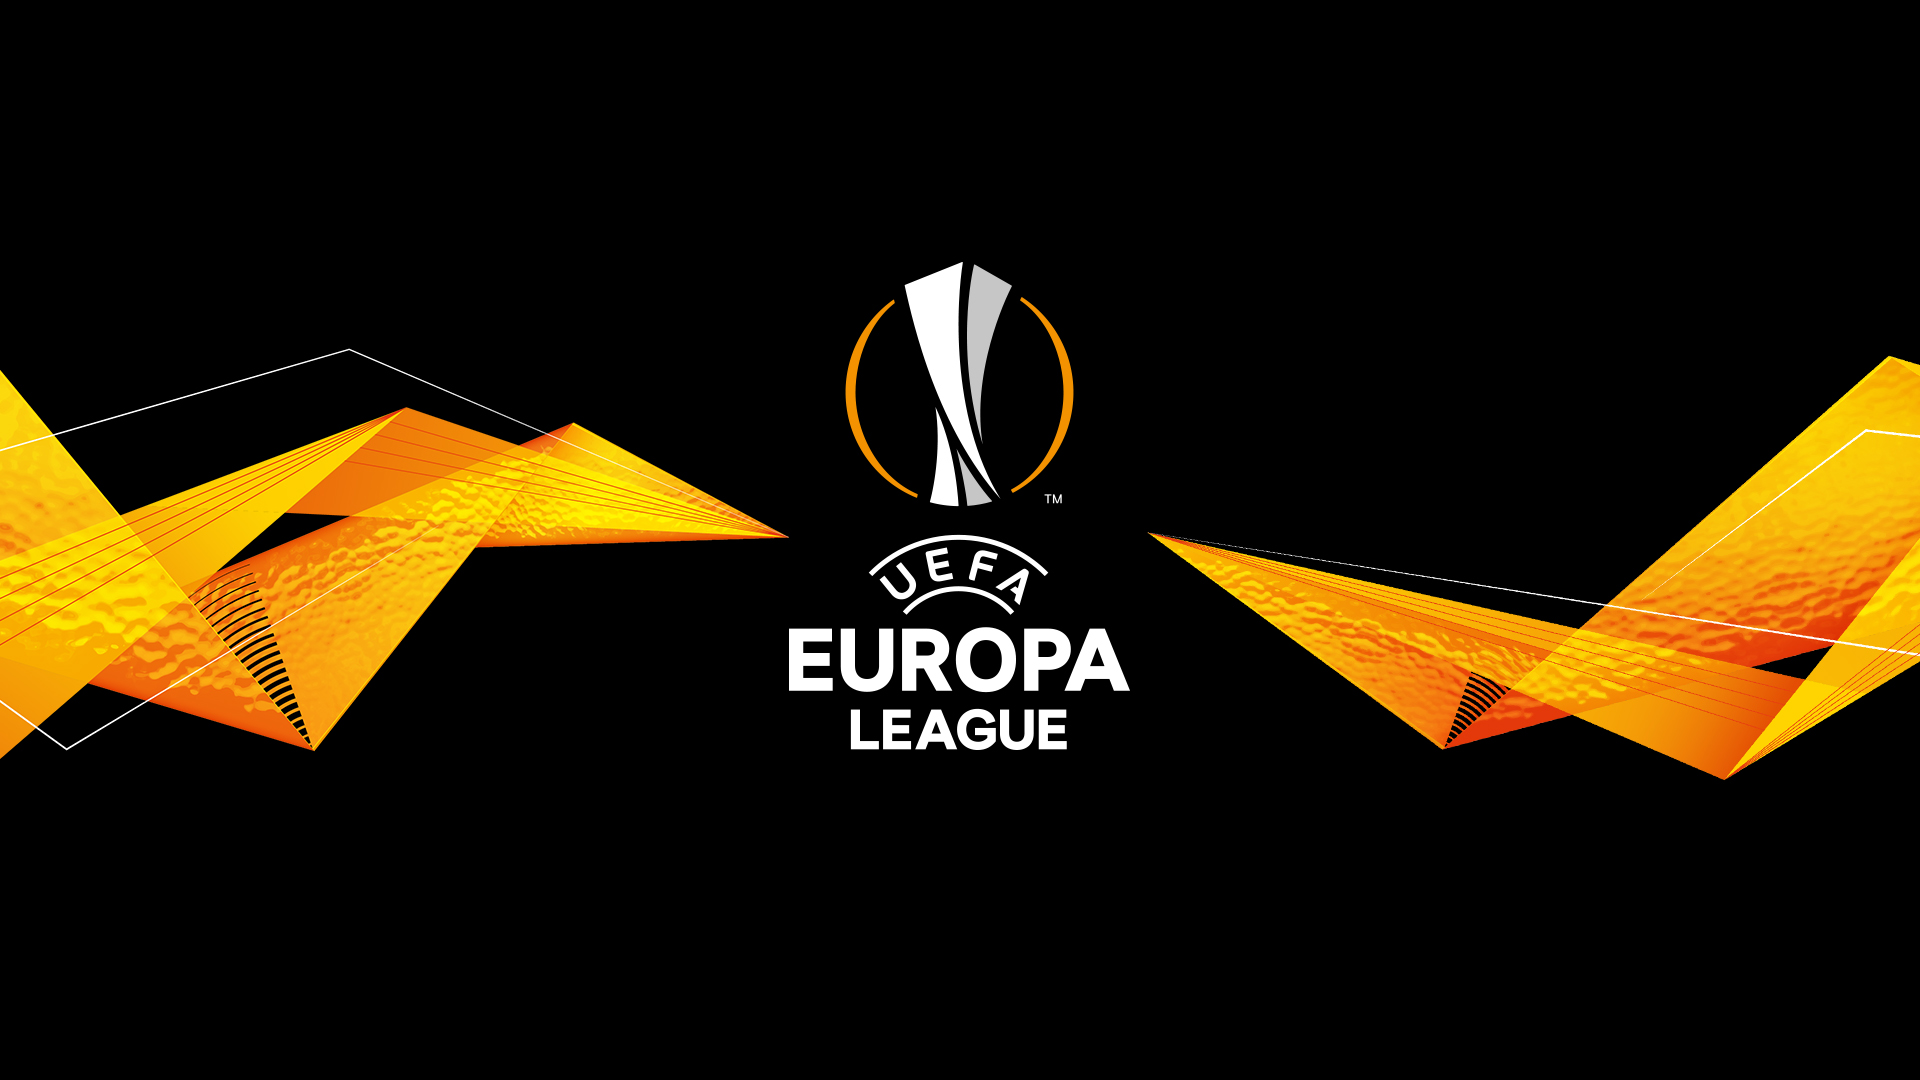 UEFA confirmed twelve teams have secured a berth in the 2022/23 Europa League group stage